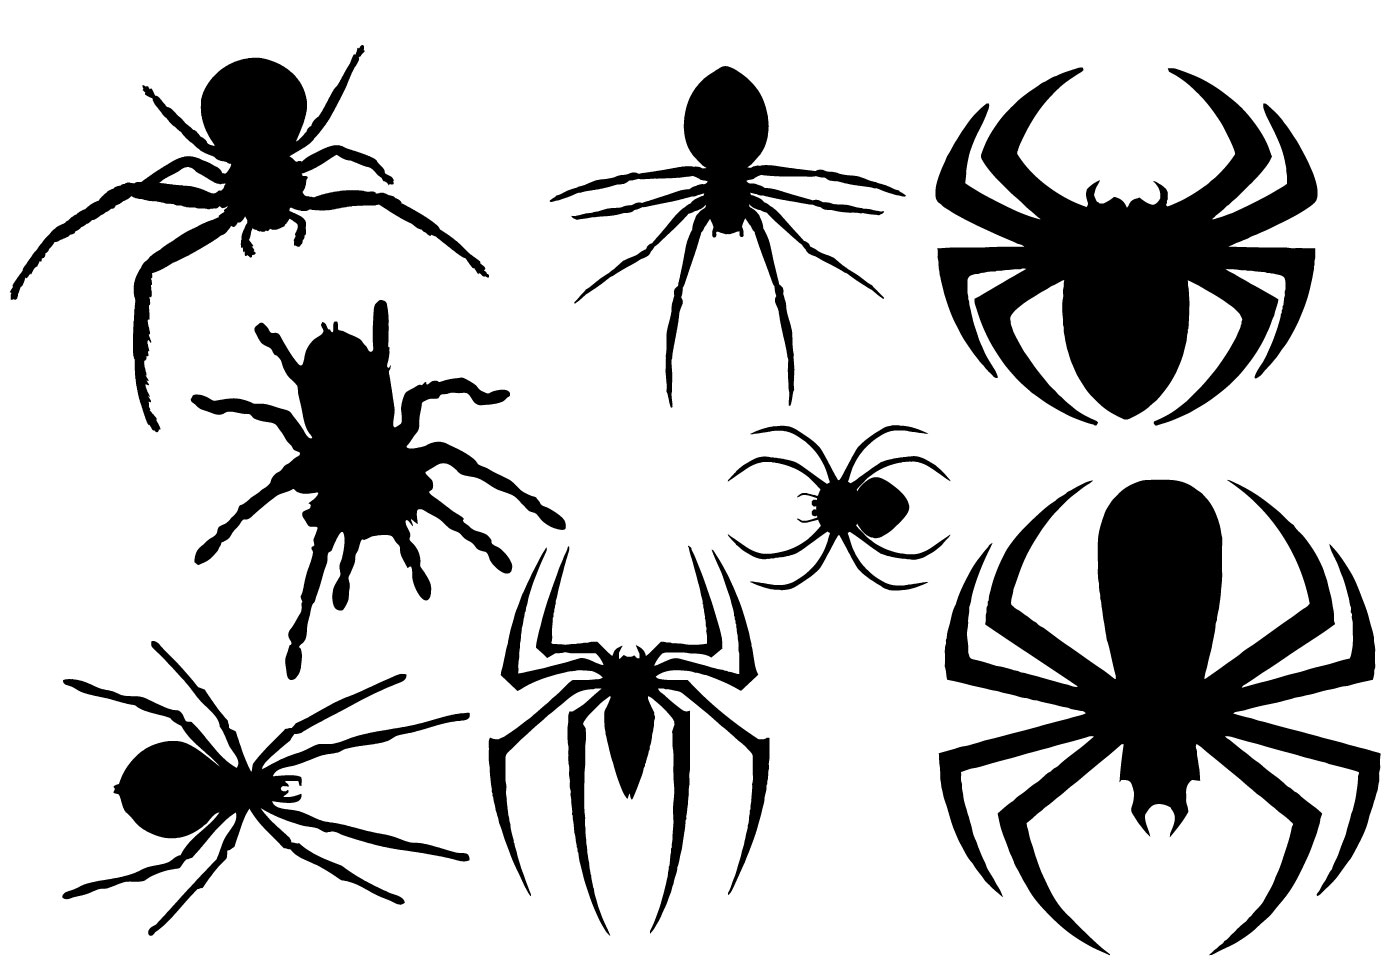 Free Spider Silhouette Vector - Download Free Vector Art, Stock